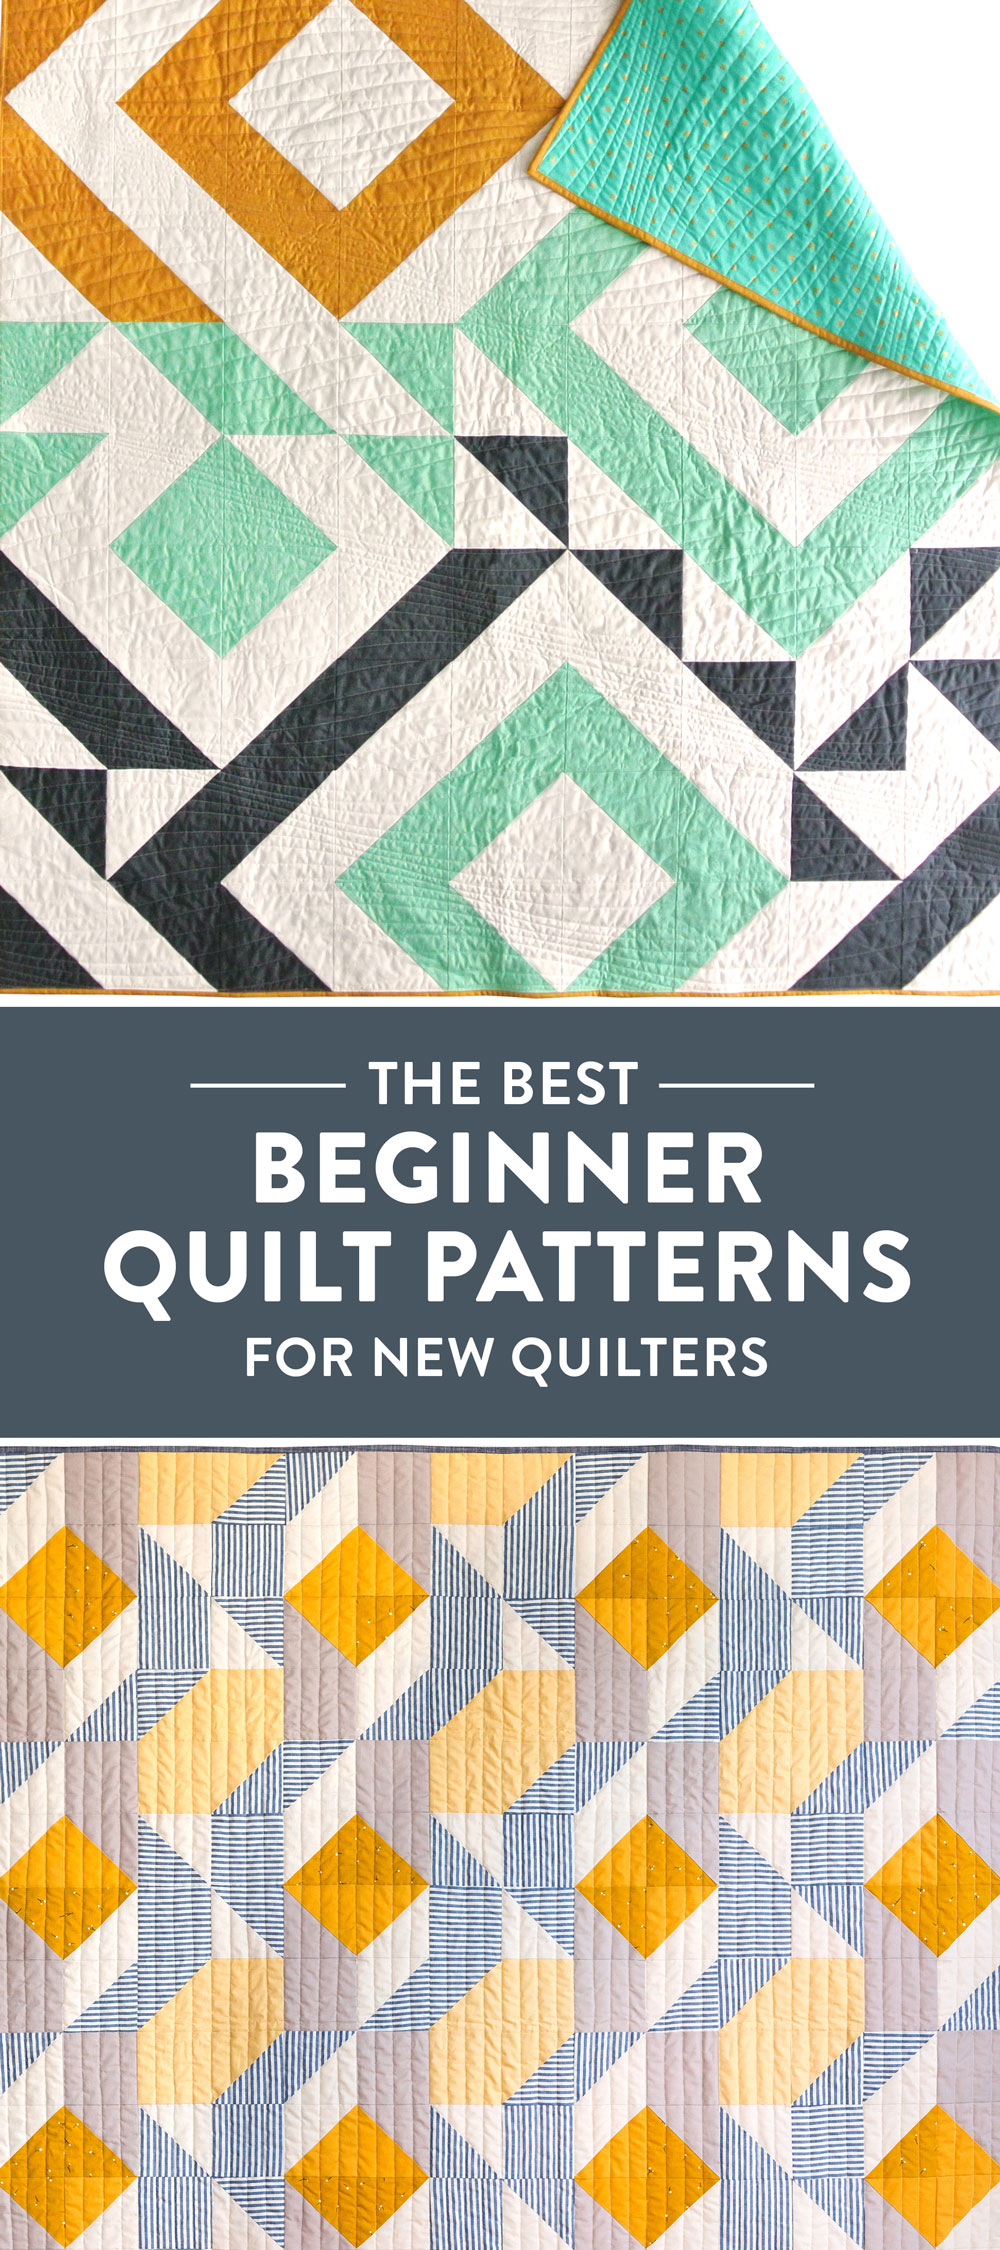 6 of the BEST beginner quilt patterns for new quilters! Jelly roll friendly, fat quarter friendly, scrap friendly – perfect for a newbie quilter. suzyquilts.com #quiltpattern #freequiltpattern